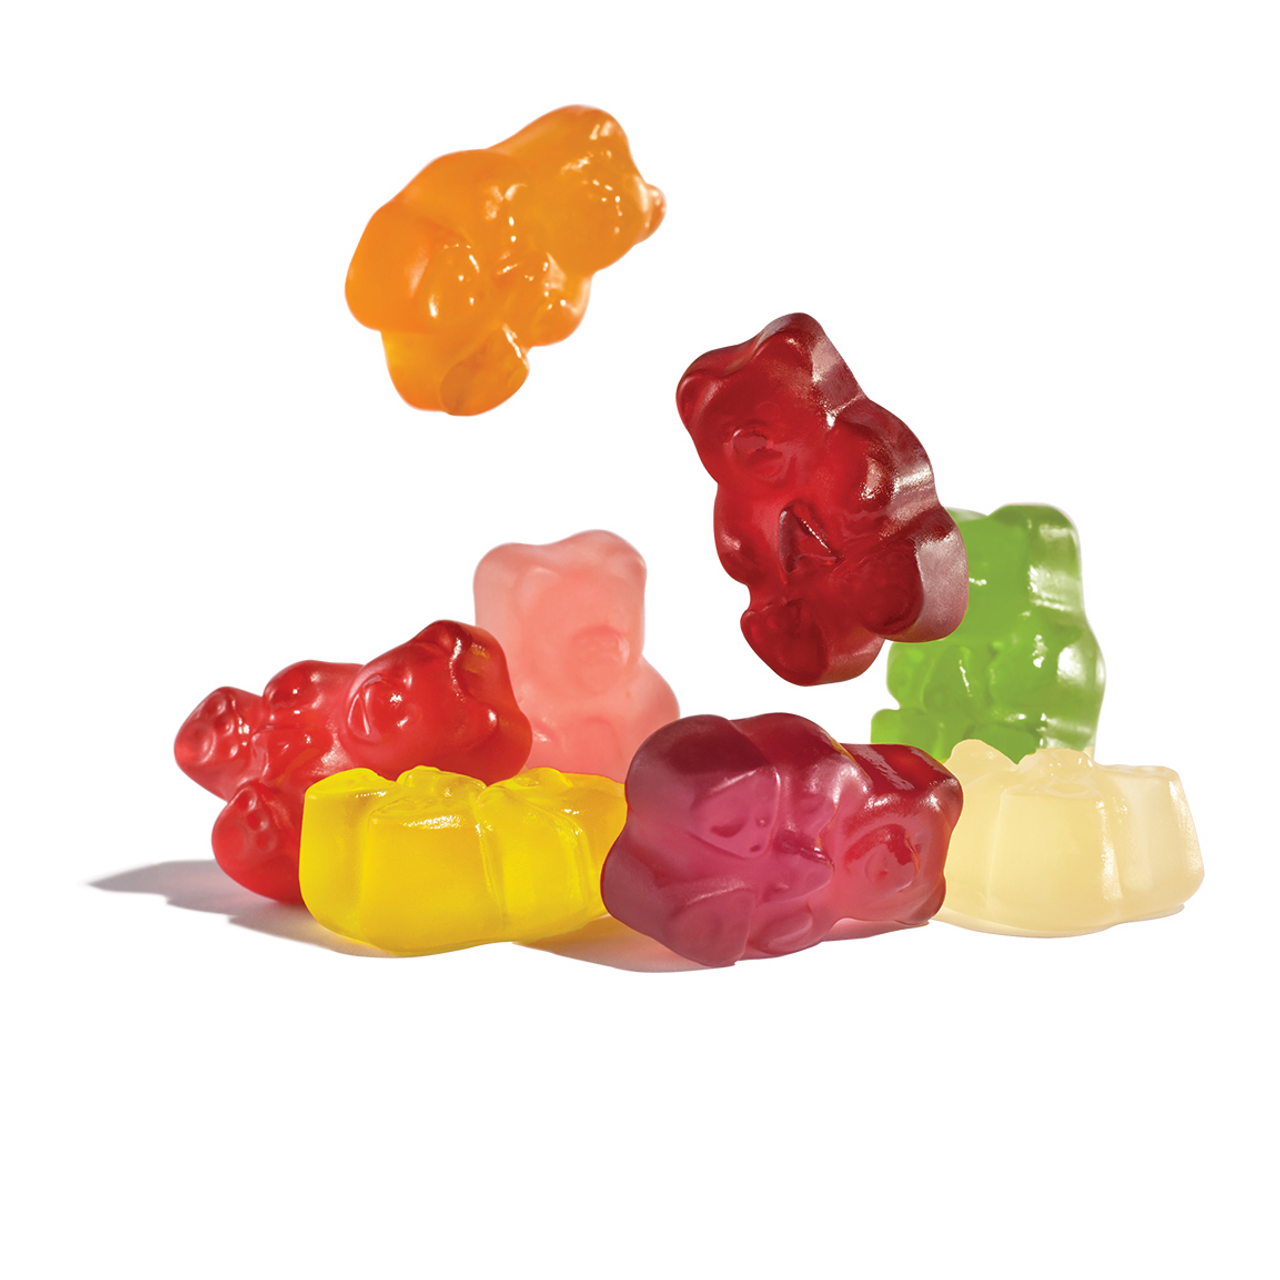 Post-Workout Recovery: The Benefits of THC Gummies for Fitness Enthusiasts